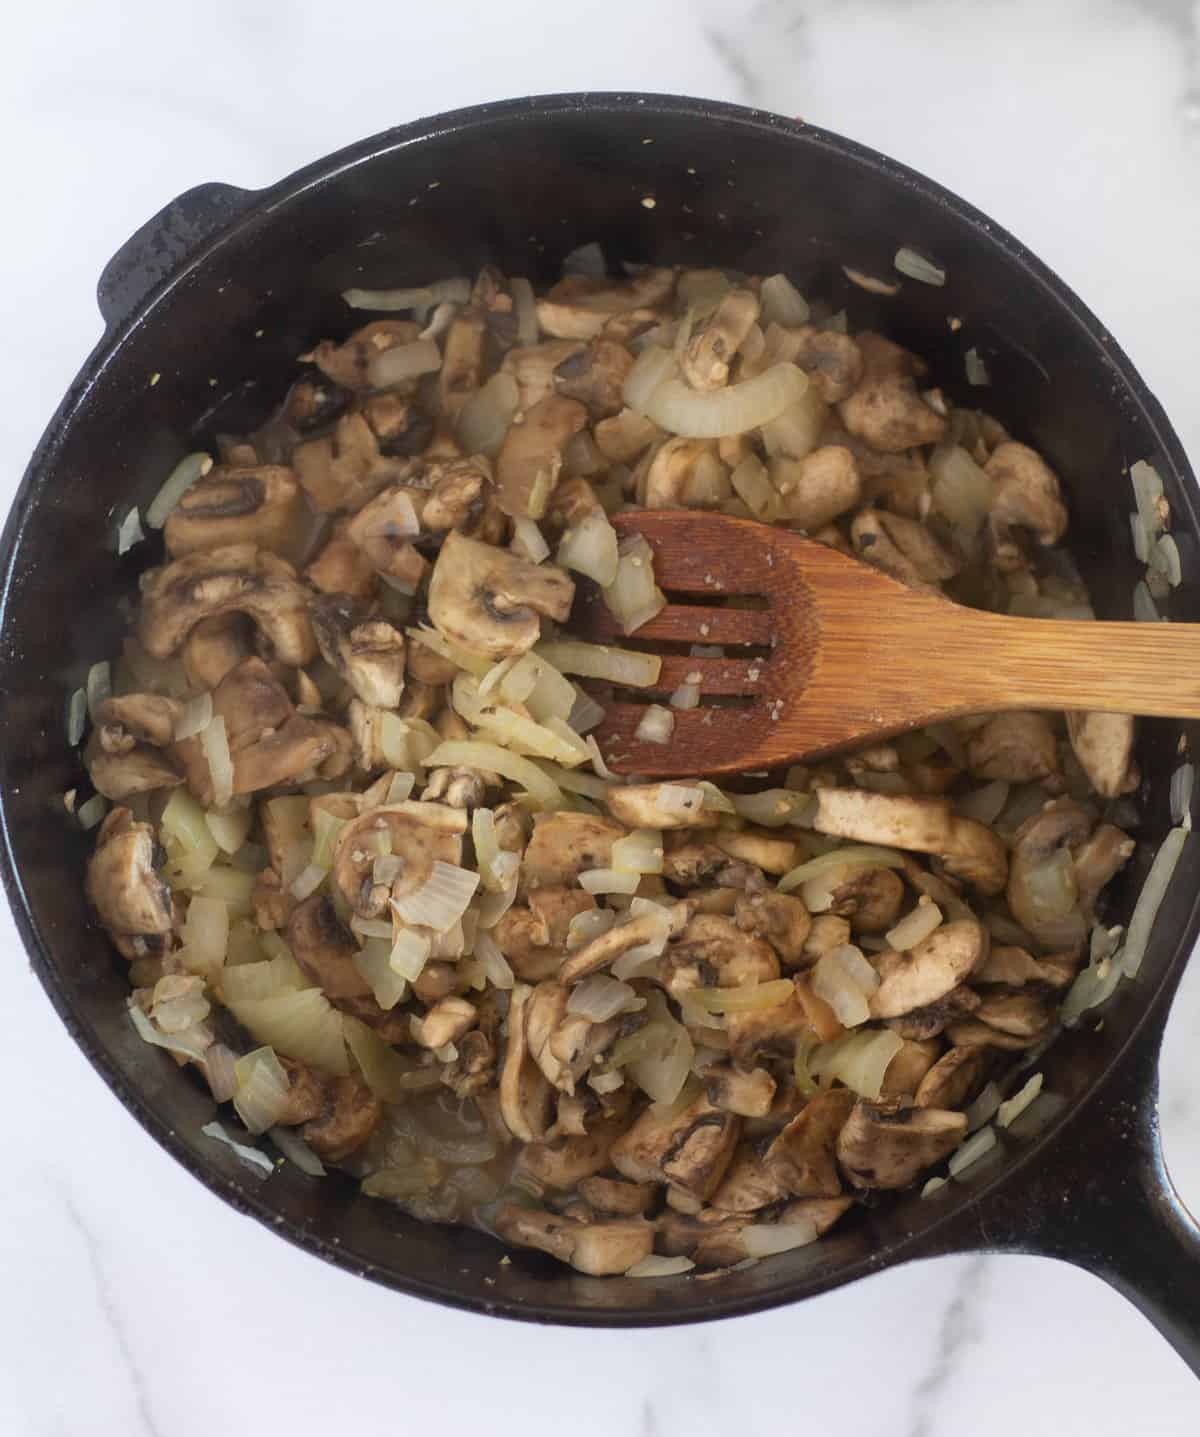 cooked mushrooms and onion in cast iron skillet.